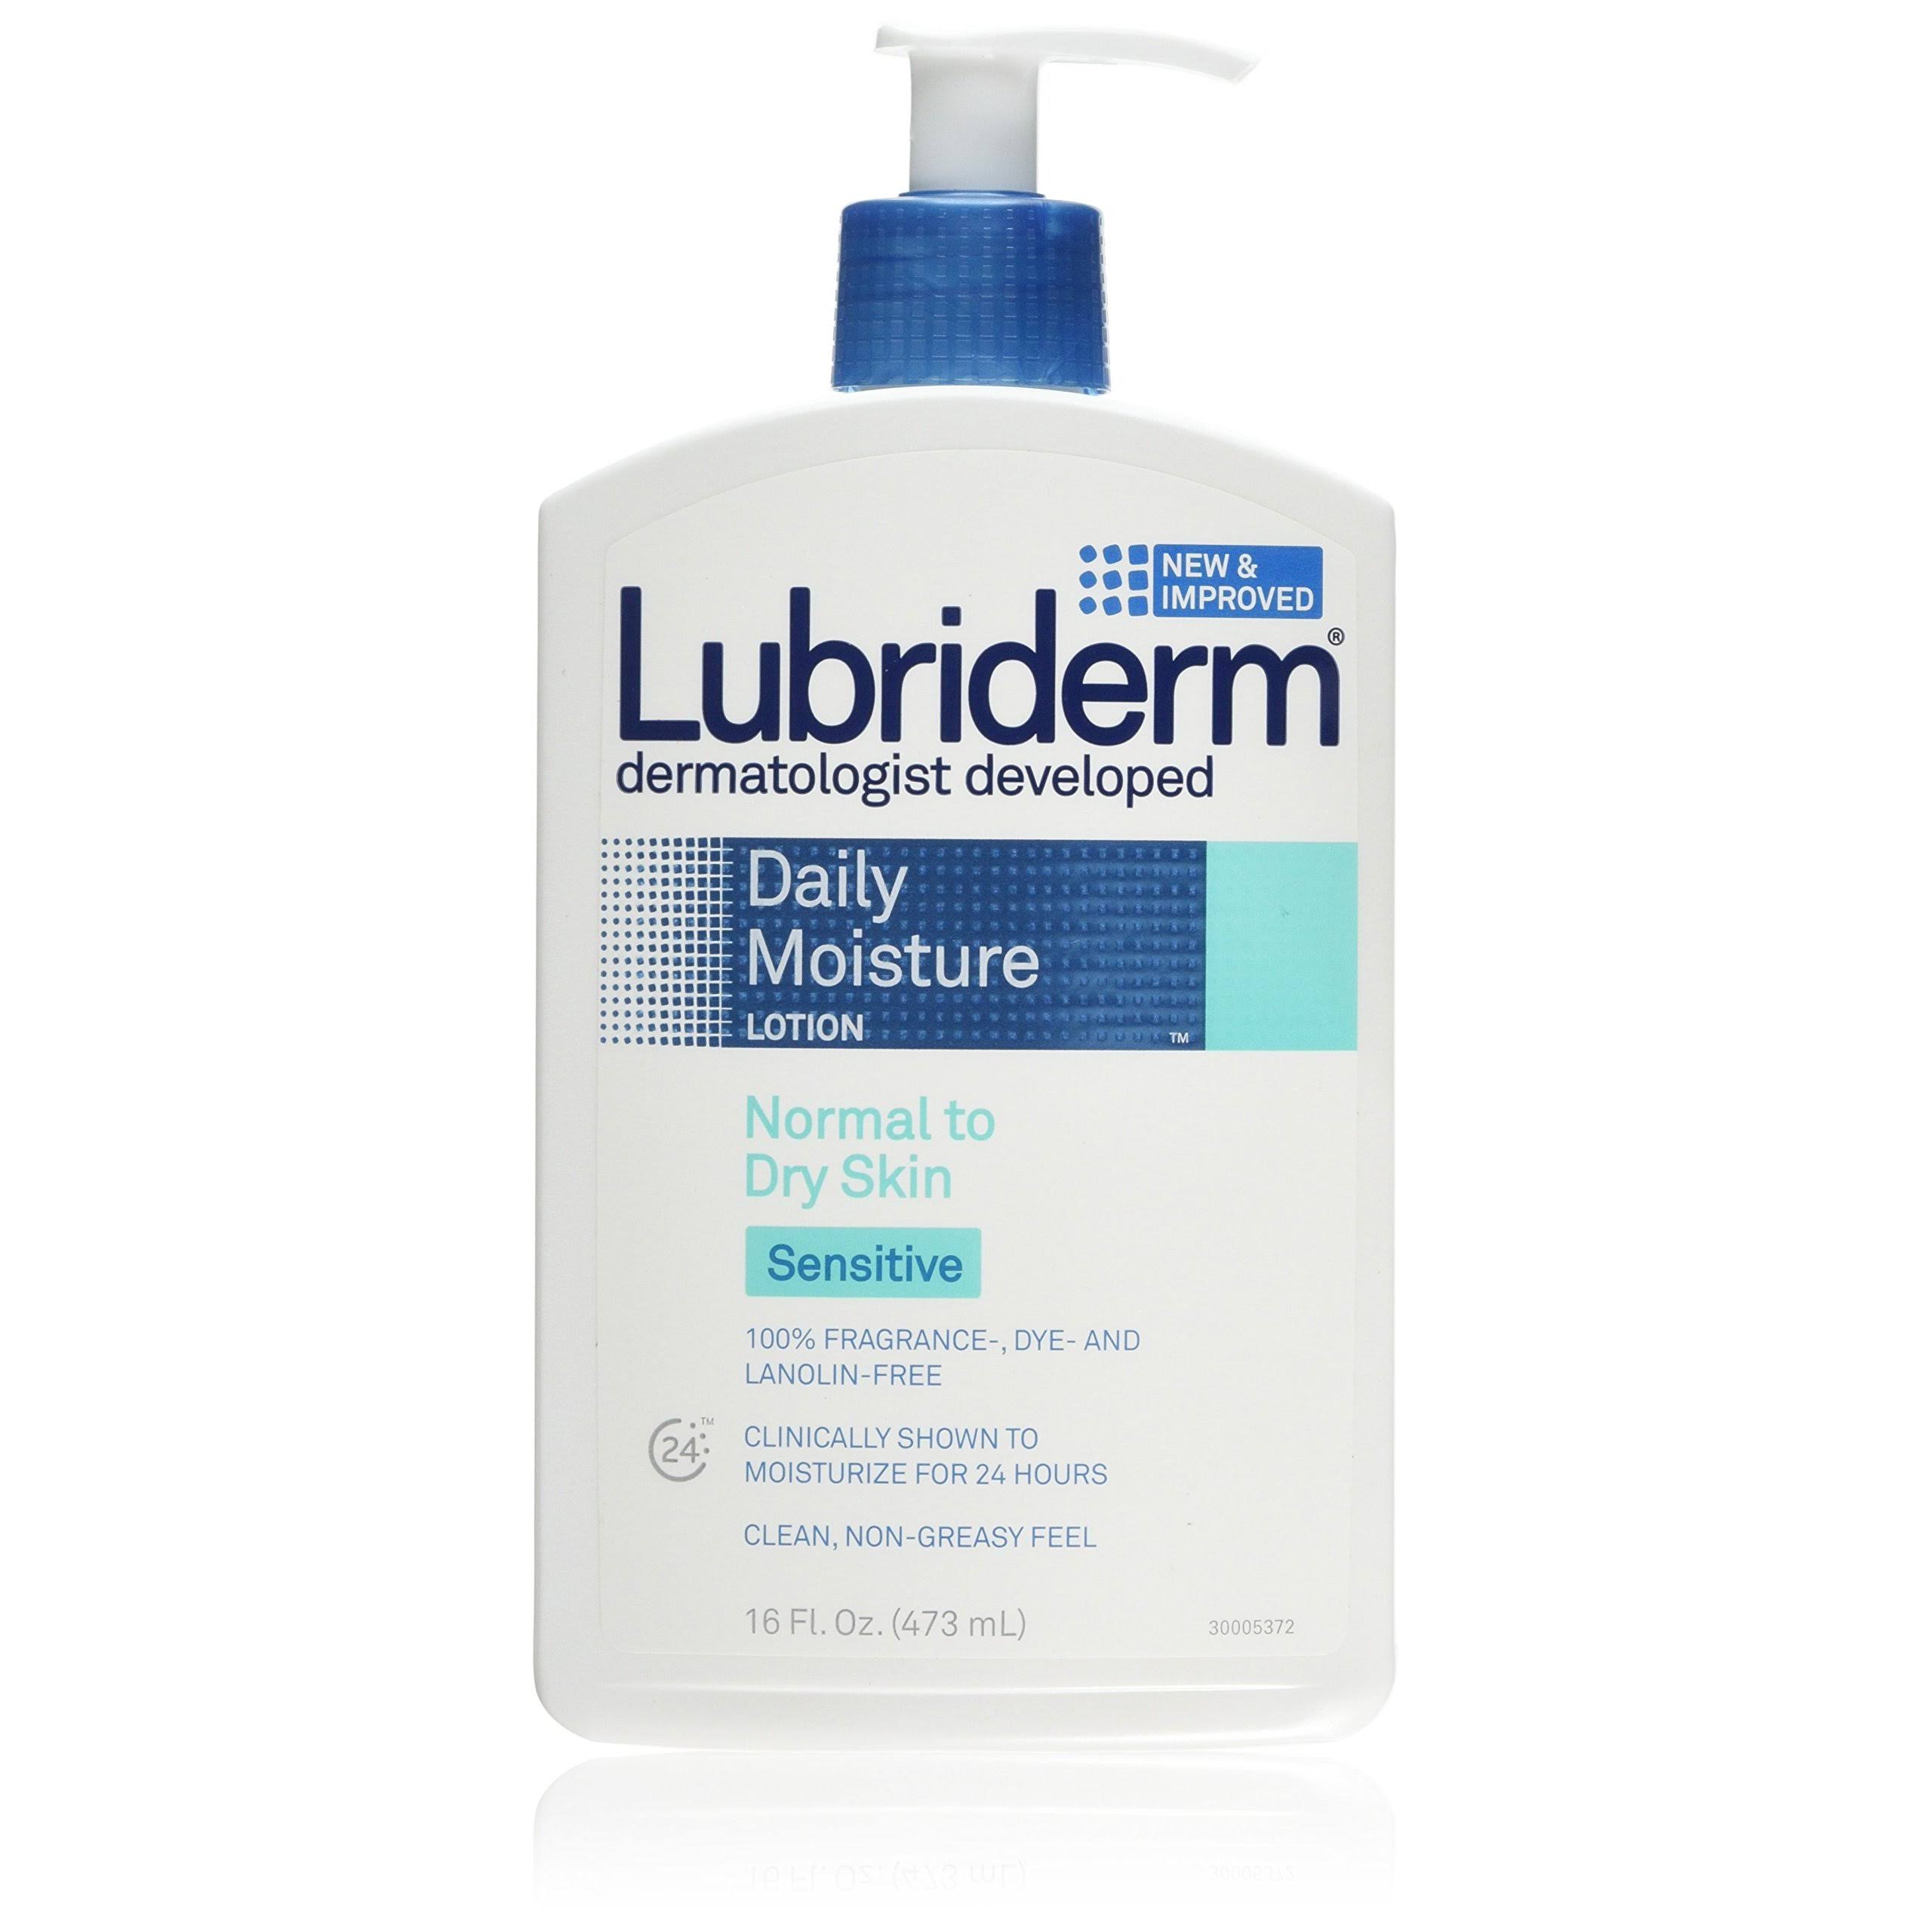 Lubriderm Daily Moisture Lotion for Normal Sensitive Dry Skin